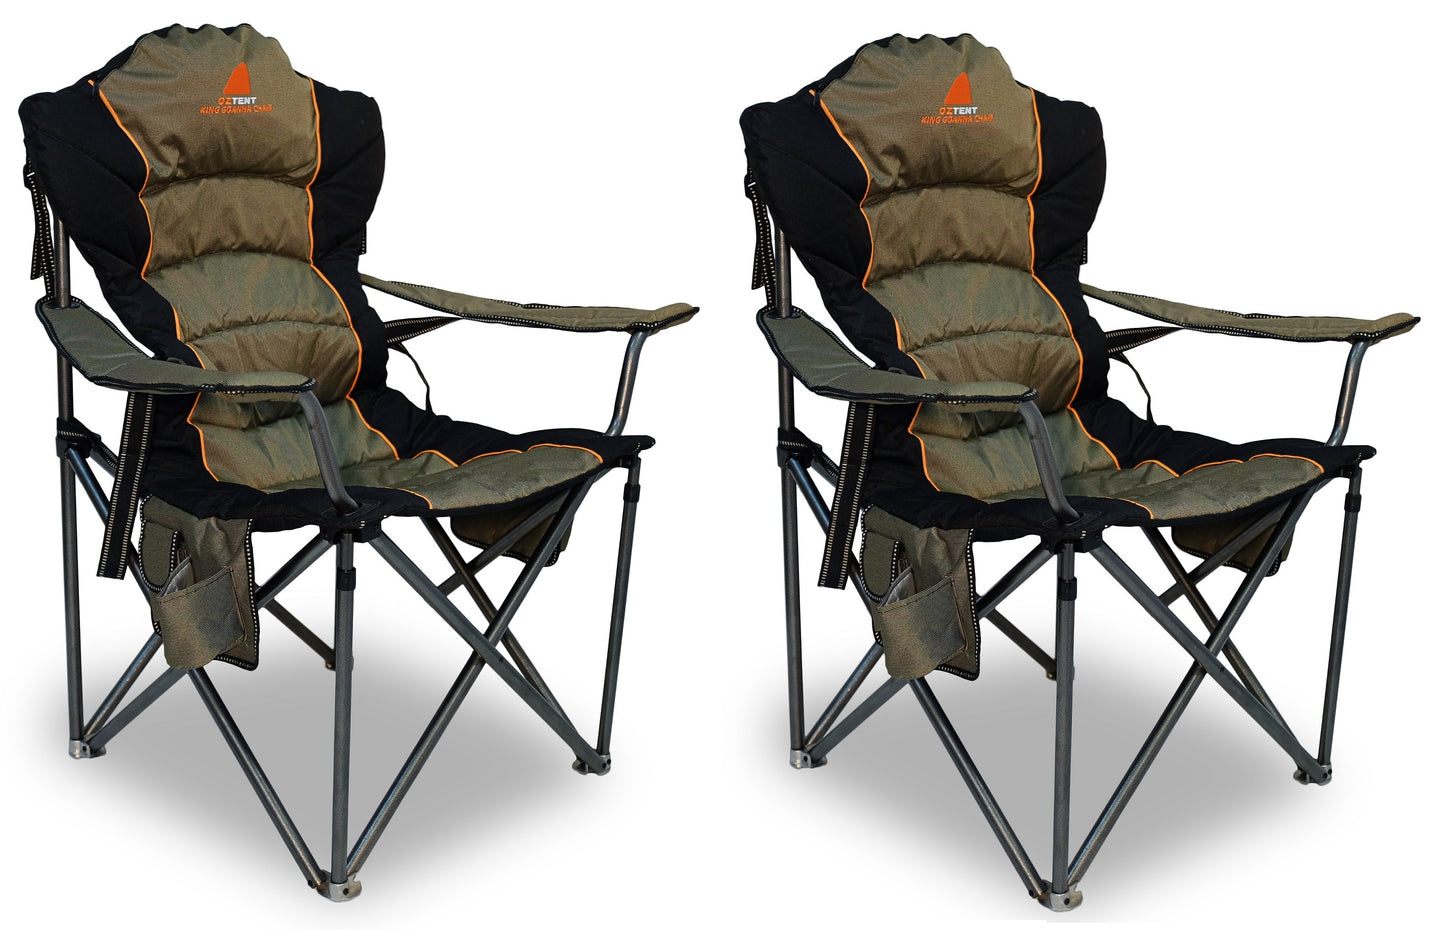 OZTENT RV5 & Two King Goanna Chairs @ £1335